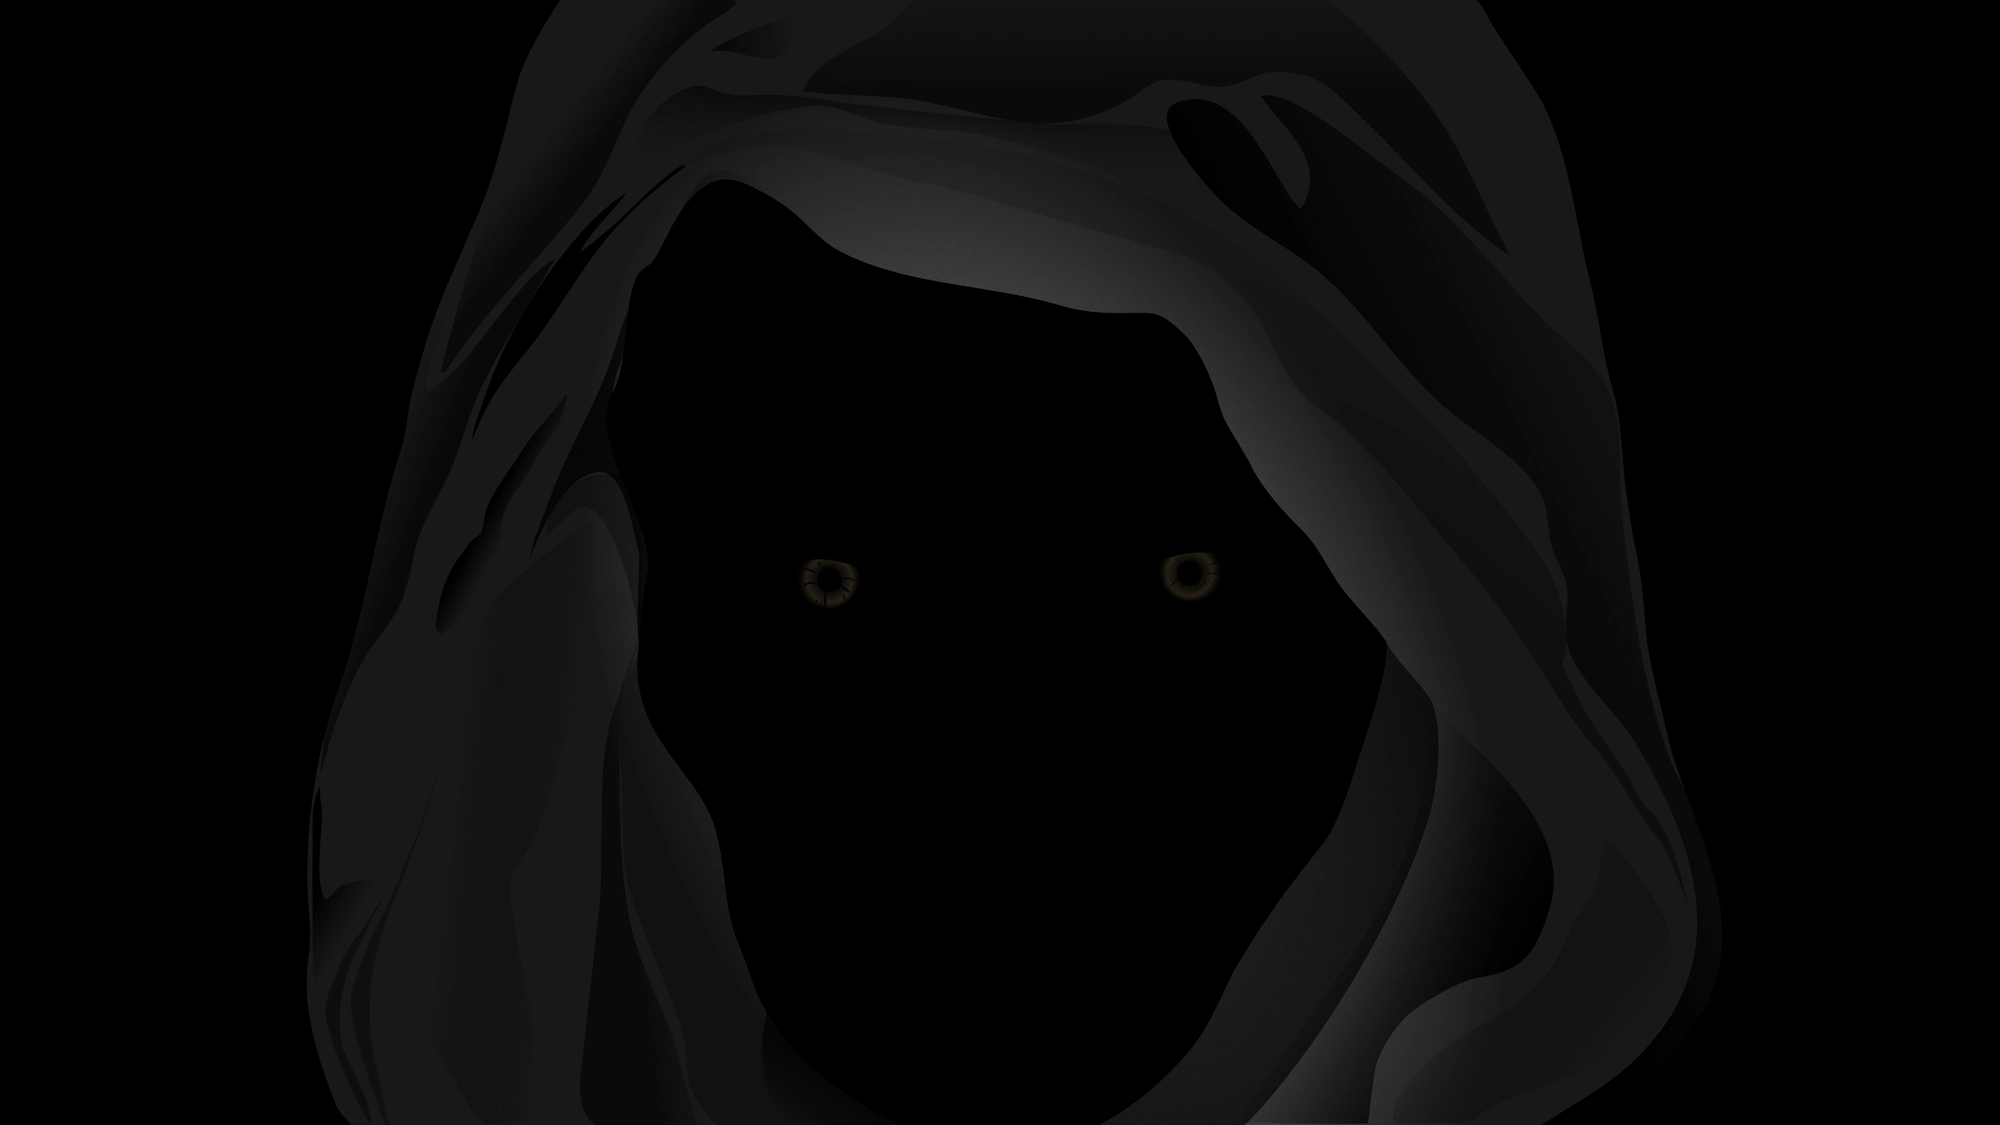 A hooded figure in cloak only the eyes are visible and glowing.